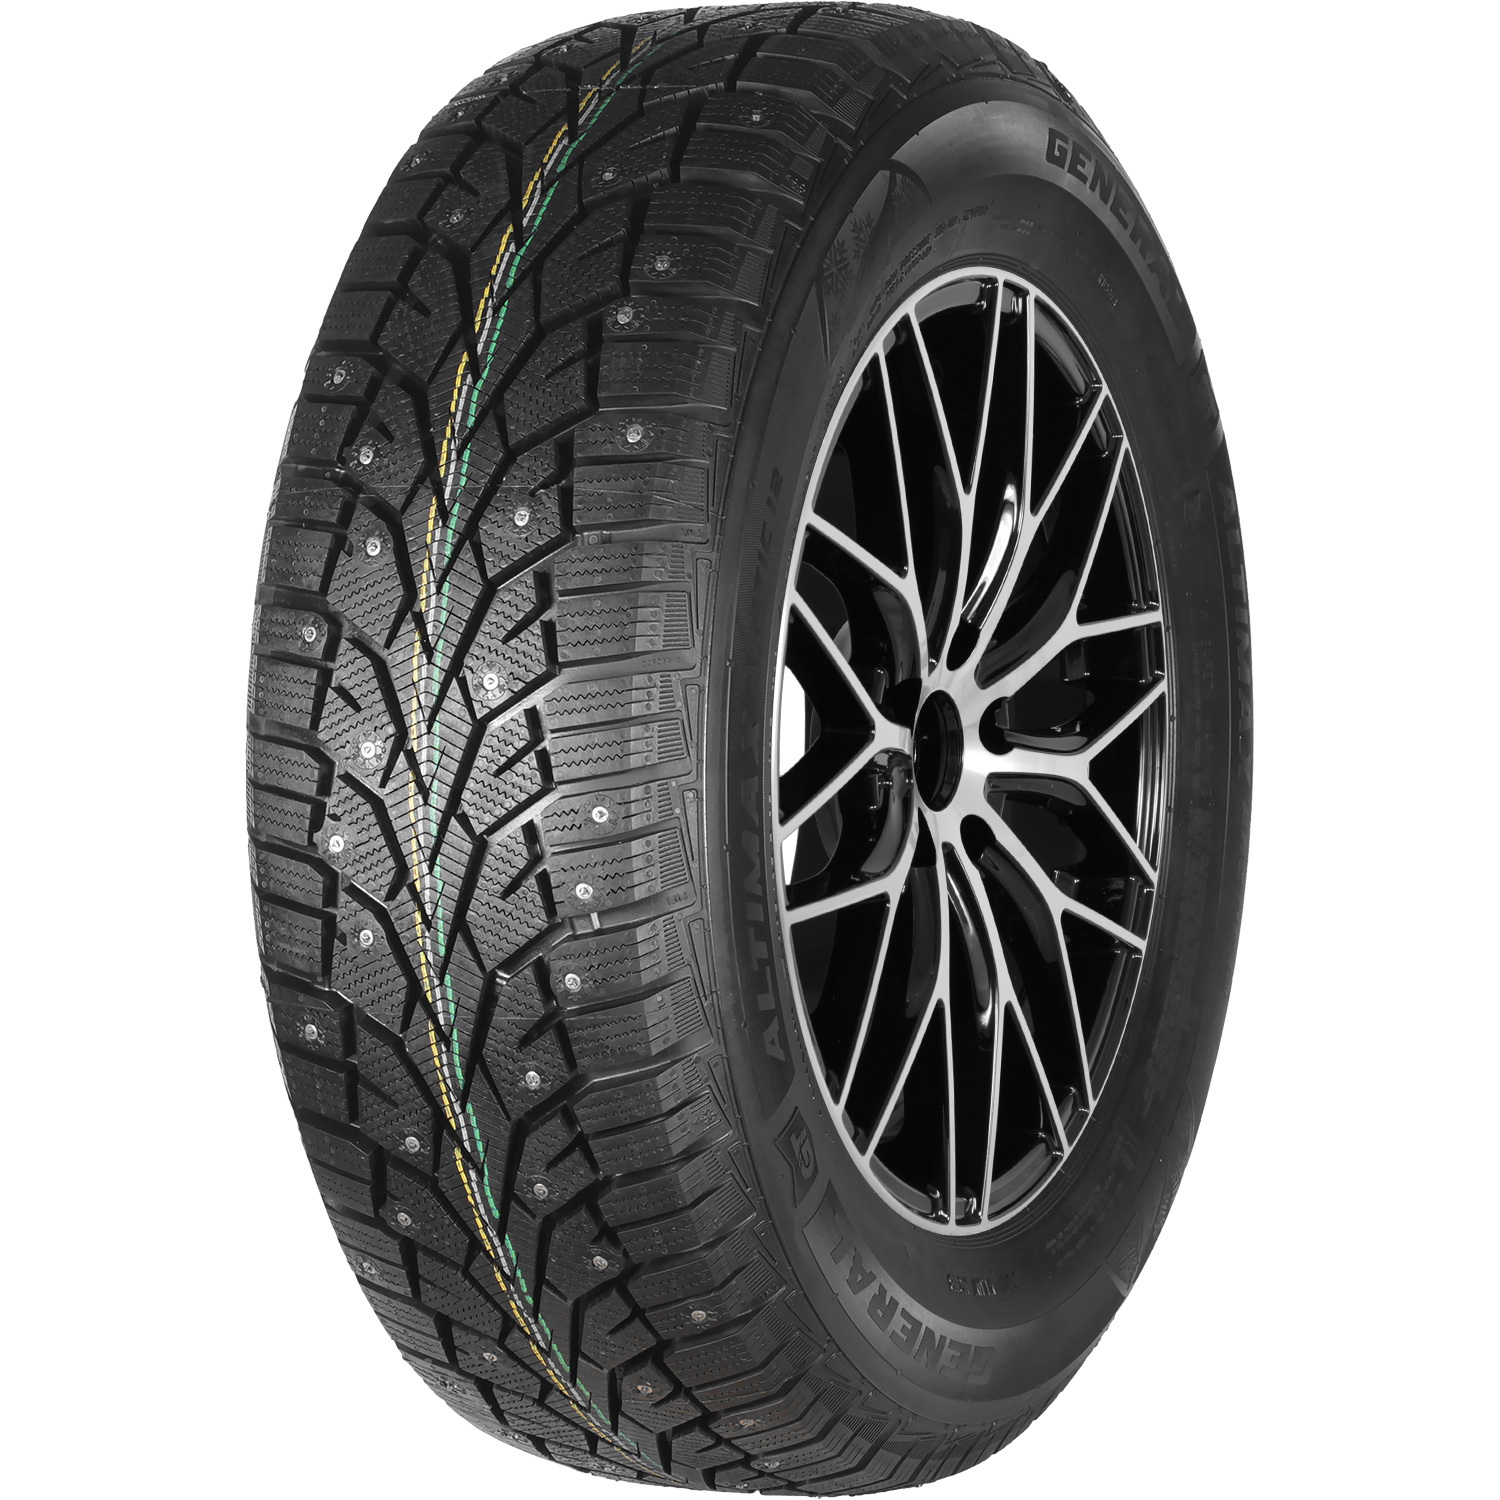 Автомобильная шина General Tire Altimax Arctic 12 185/70 R14 92T Шипованные camping spare tire cover car accessories custom spare tire covers your own personalized design tire protectors